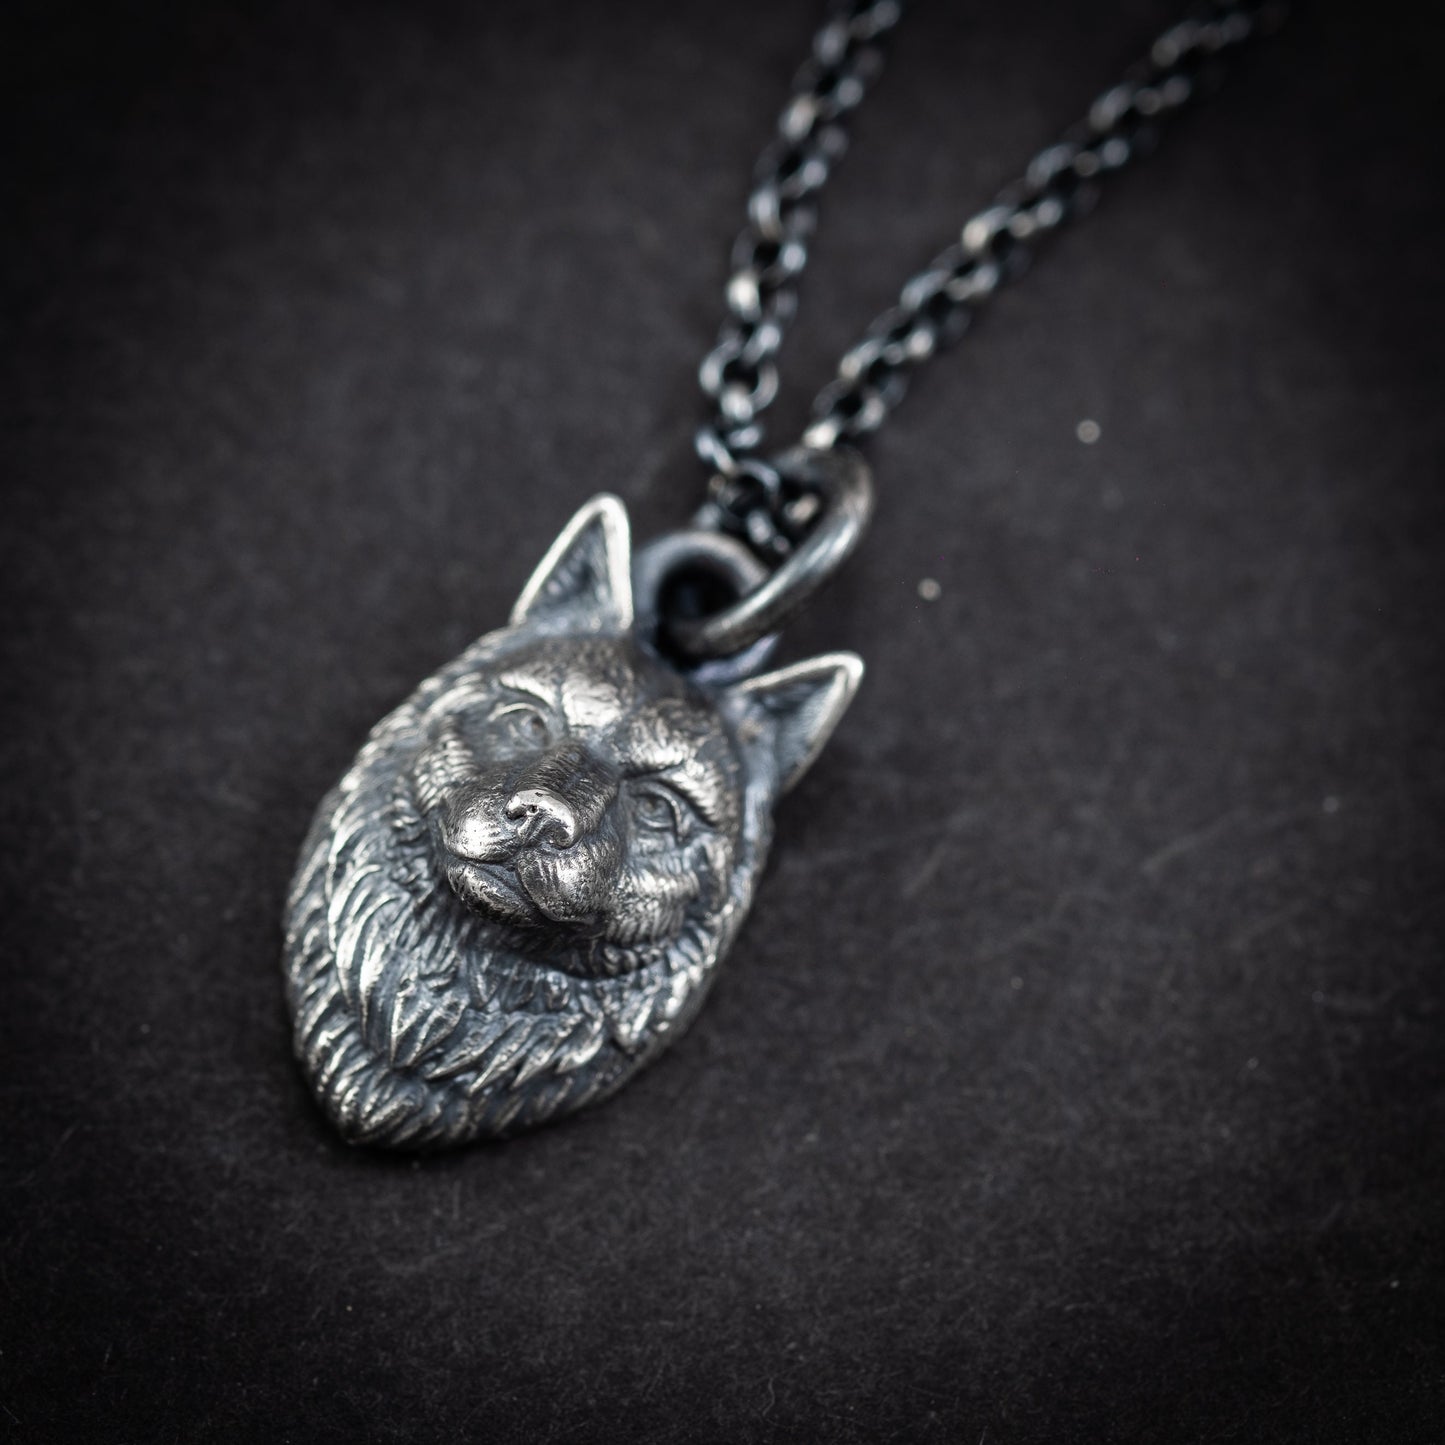 Wolf Head animal pendant mens necklace, Unique forest nature jewelry, gift for men, mens necklace, Christmas boyfriend gift